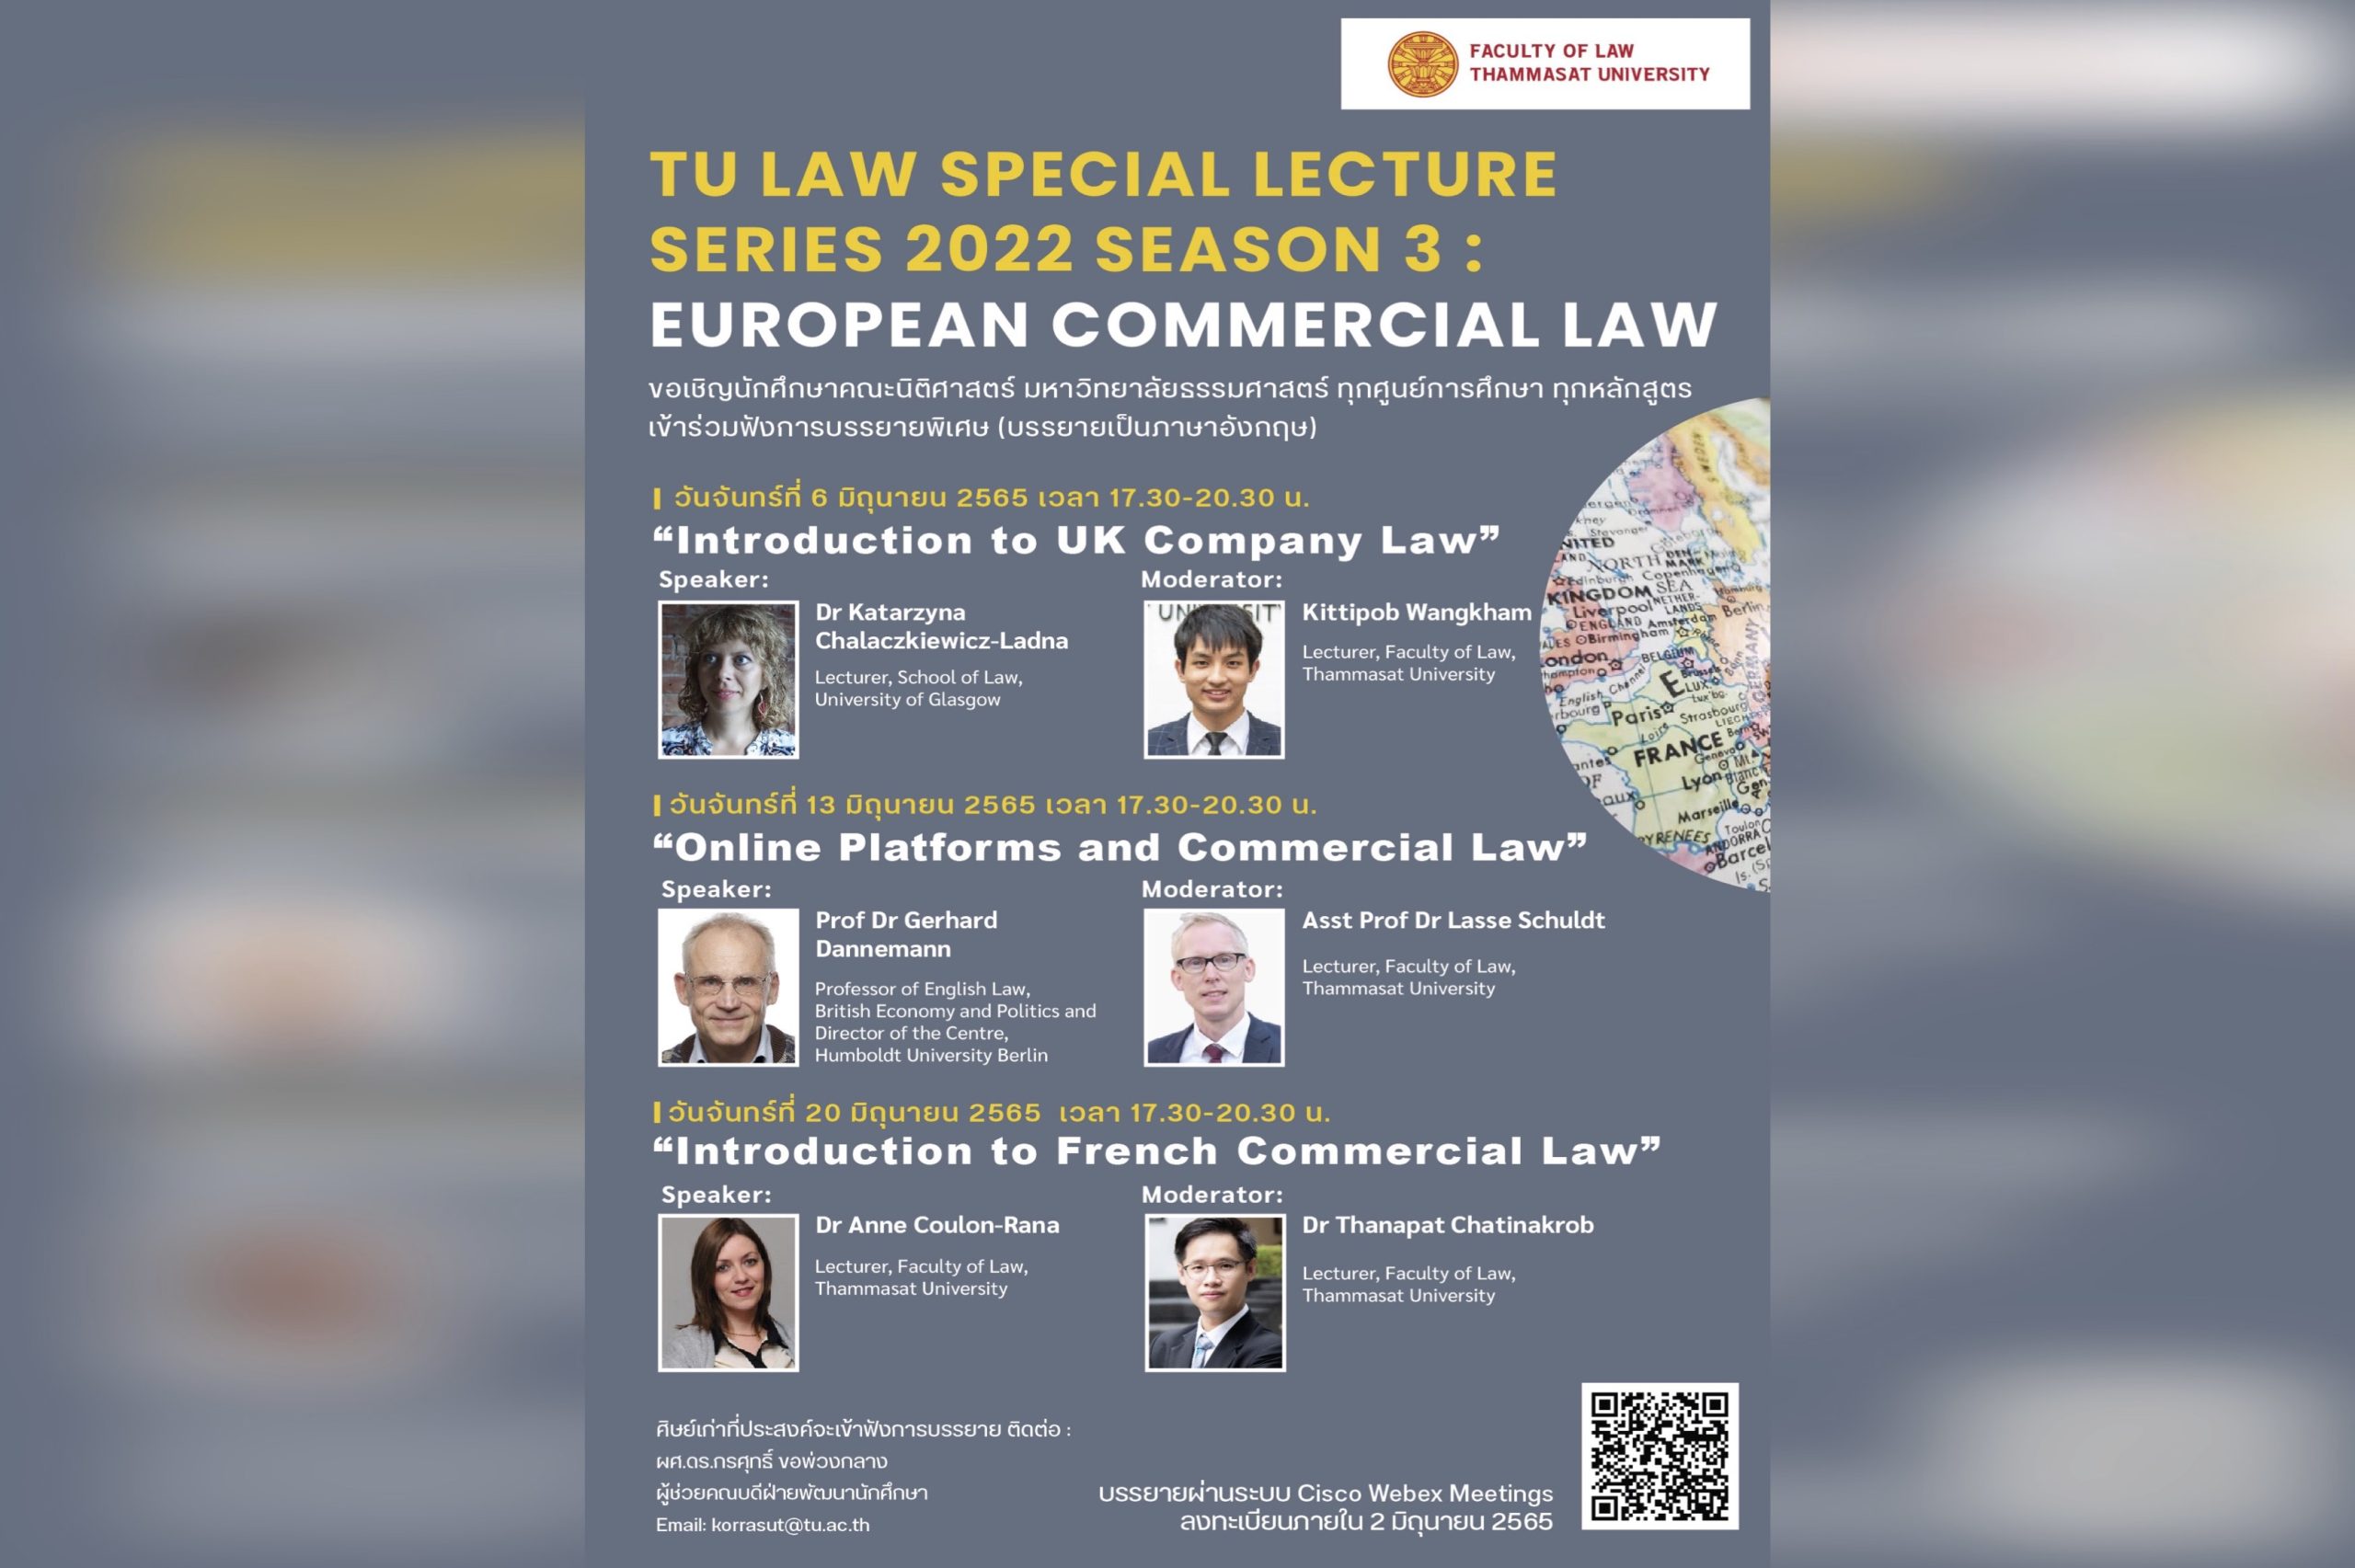 TU Law Special Lecture Series 2022 Season 3 : European Commercial Law